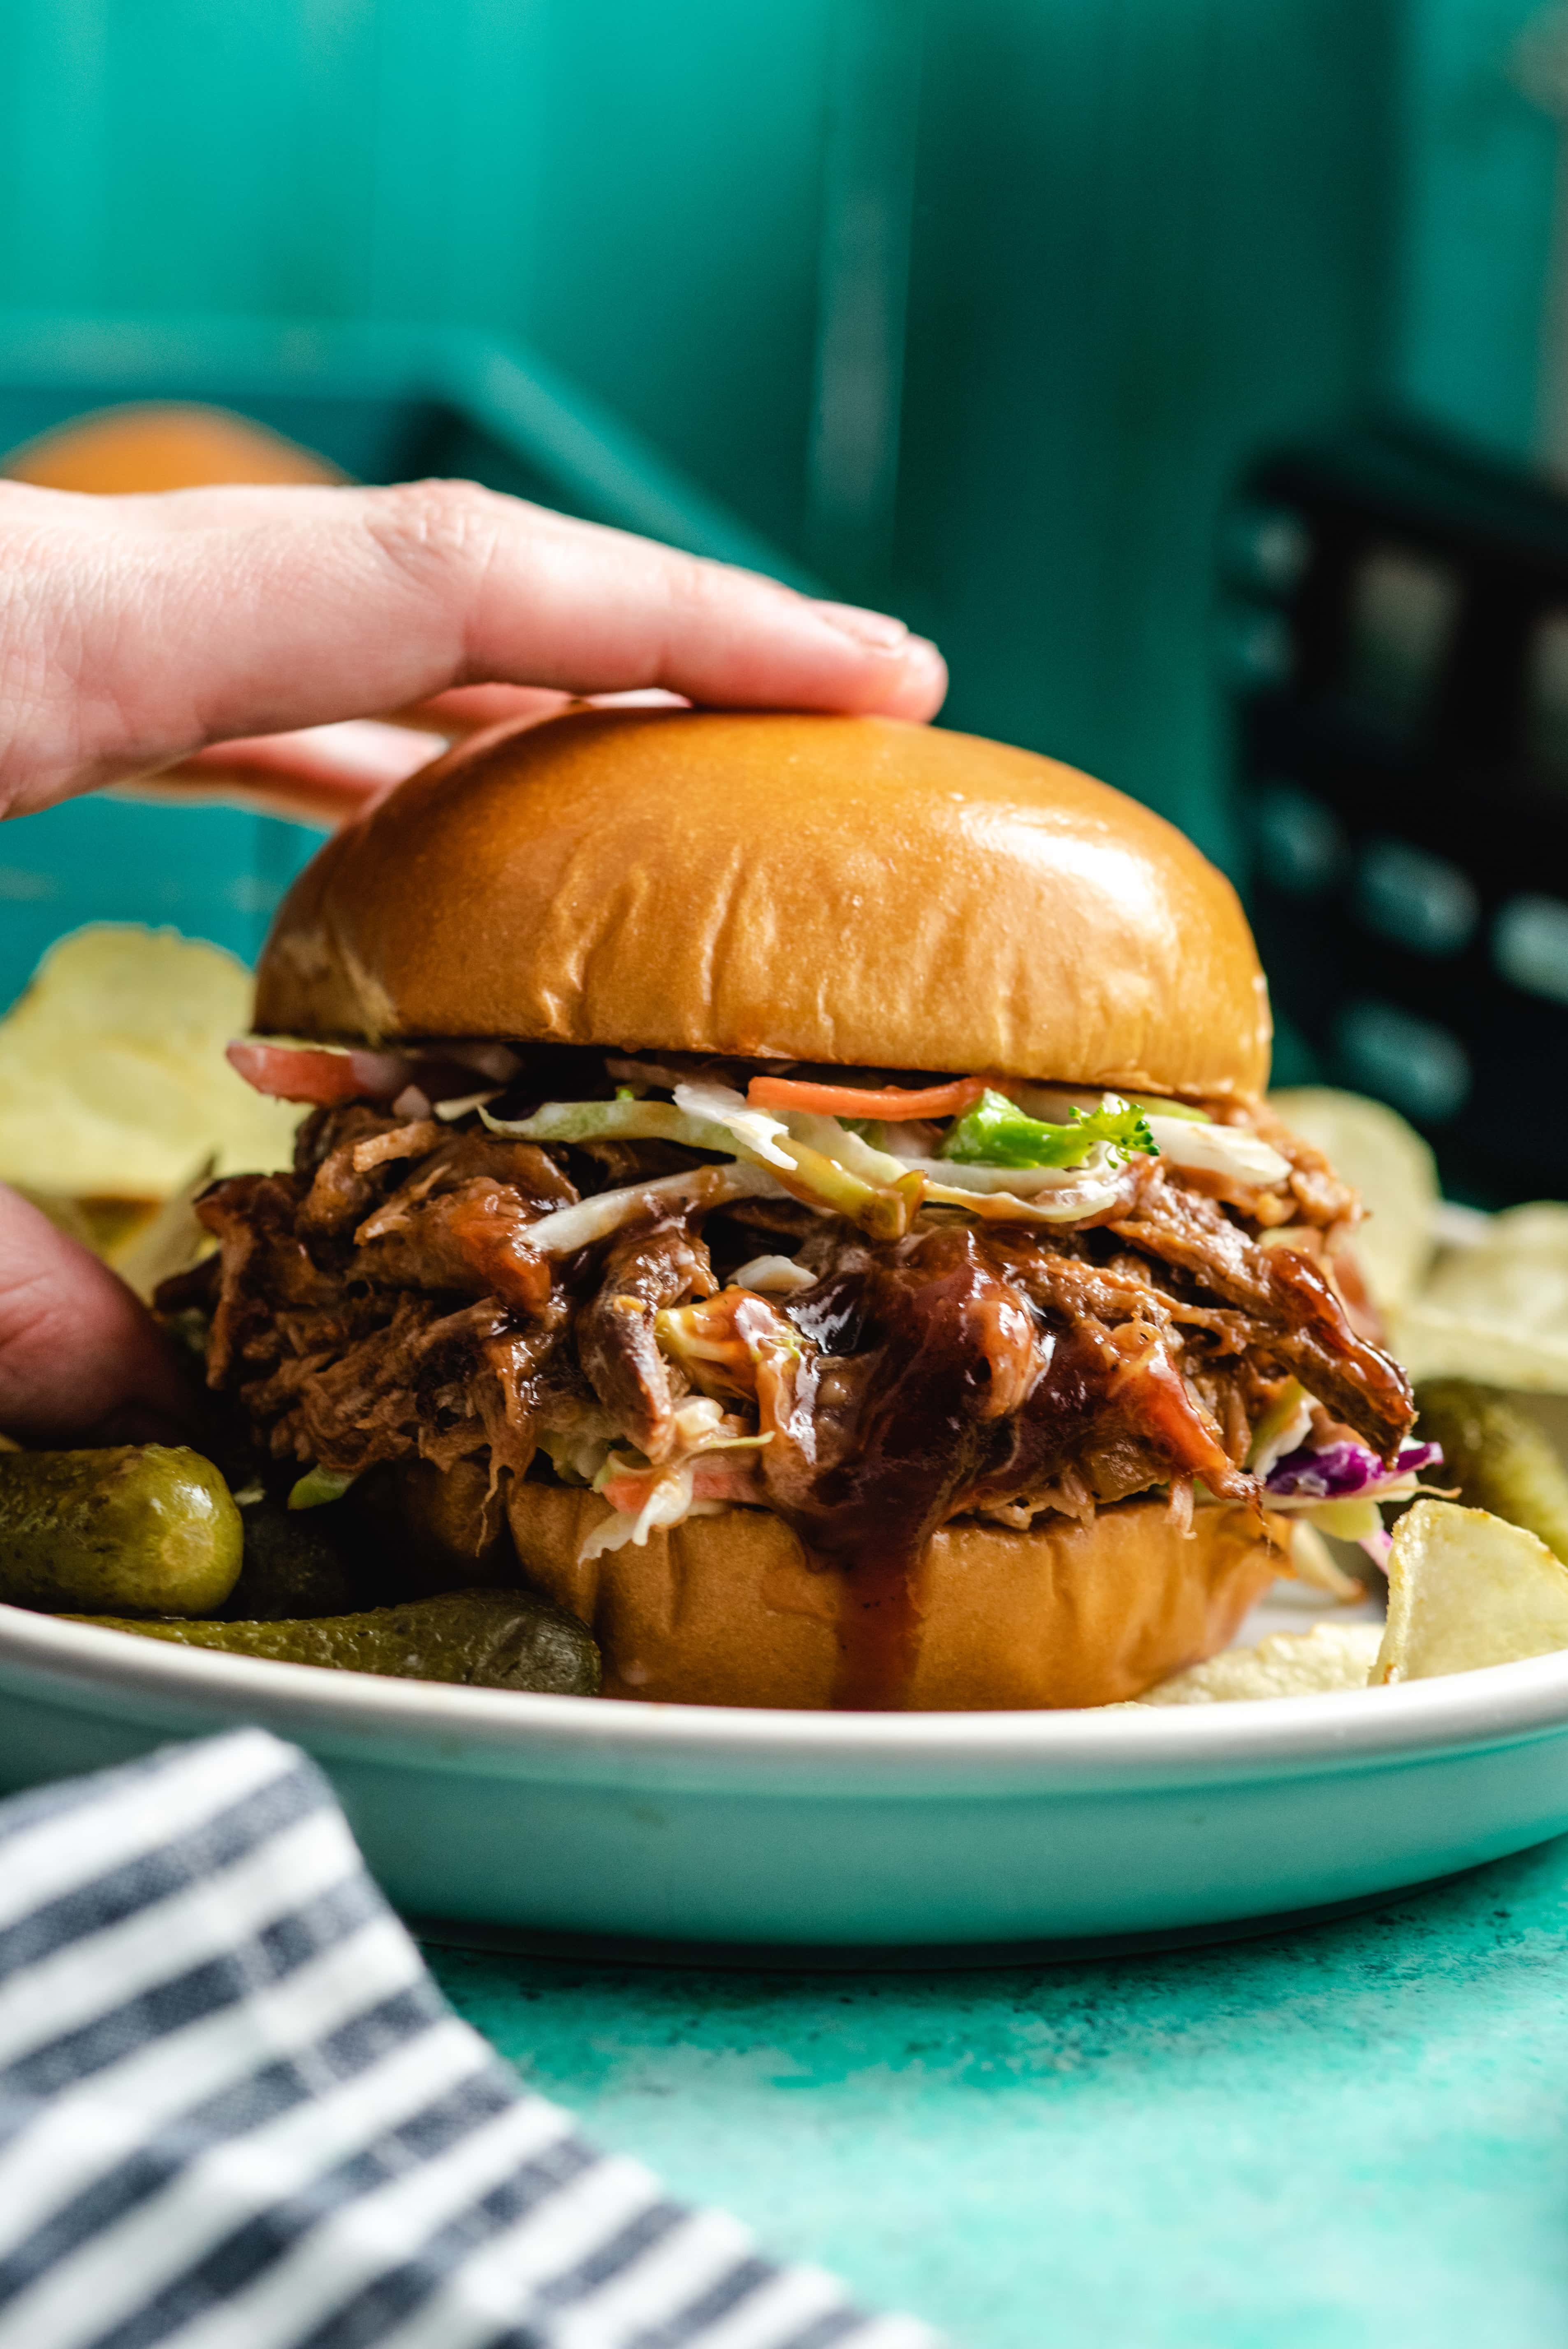 how many sandwiches does 1 lb of pulled pork make